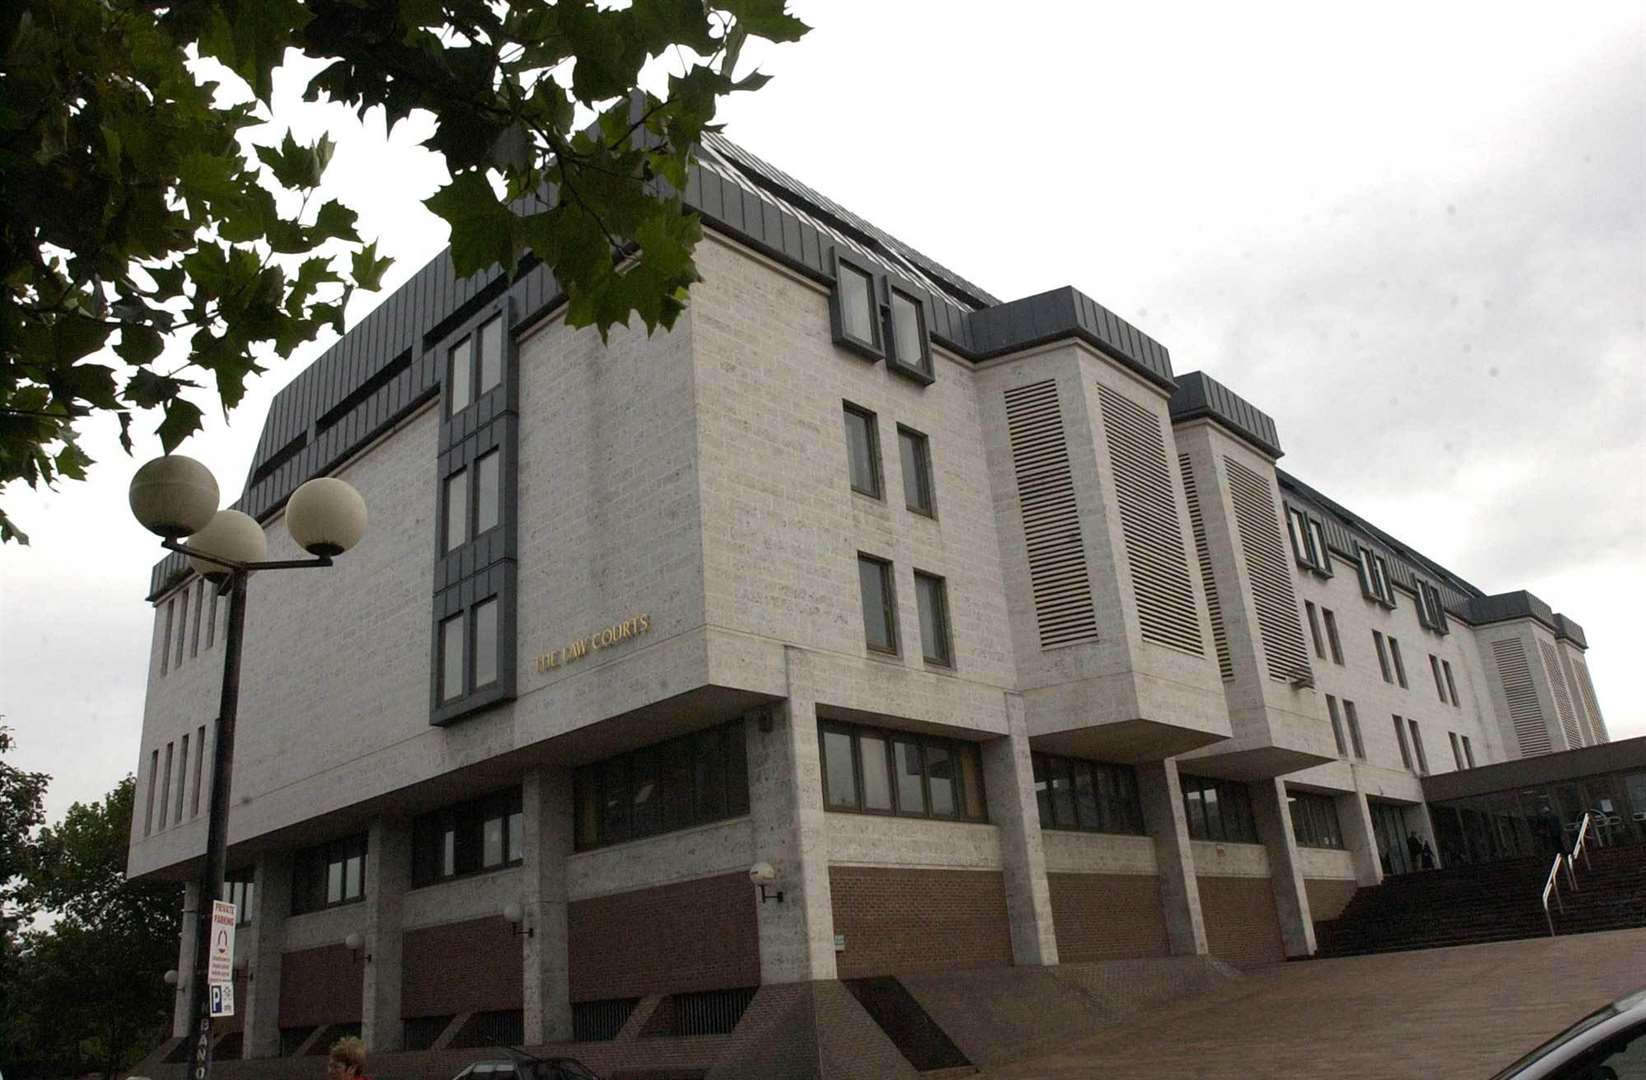 Dean Jefferies appeared at Maidstone Crown Court